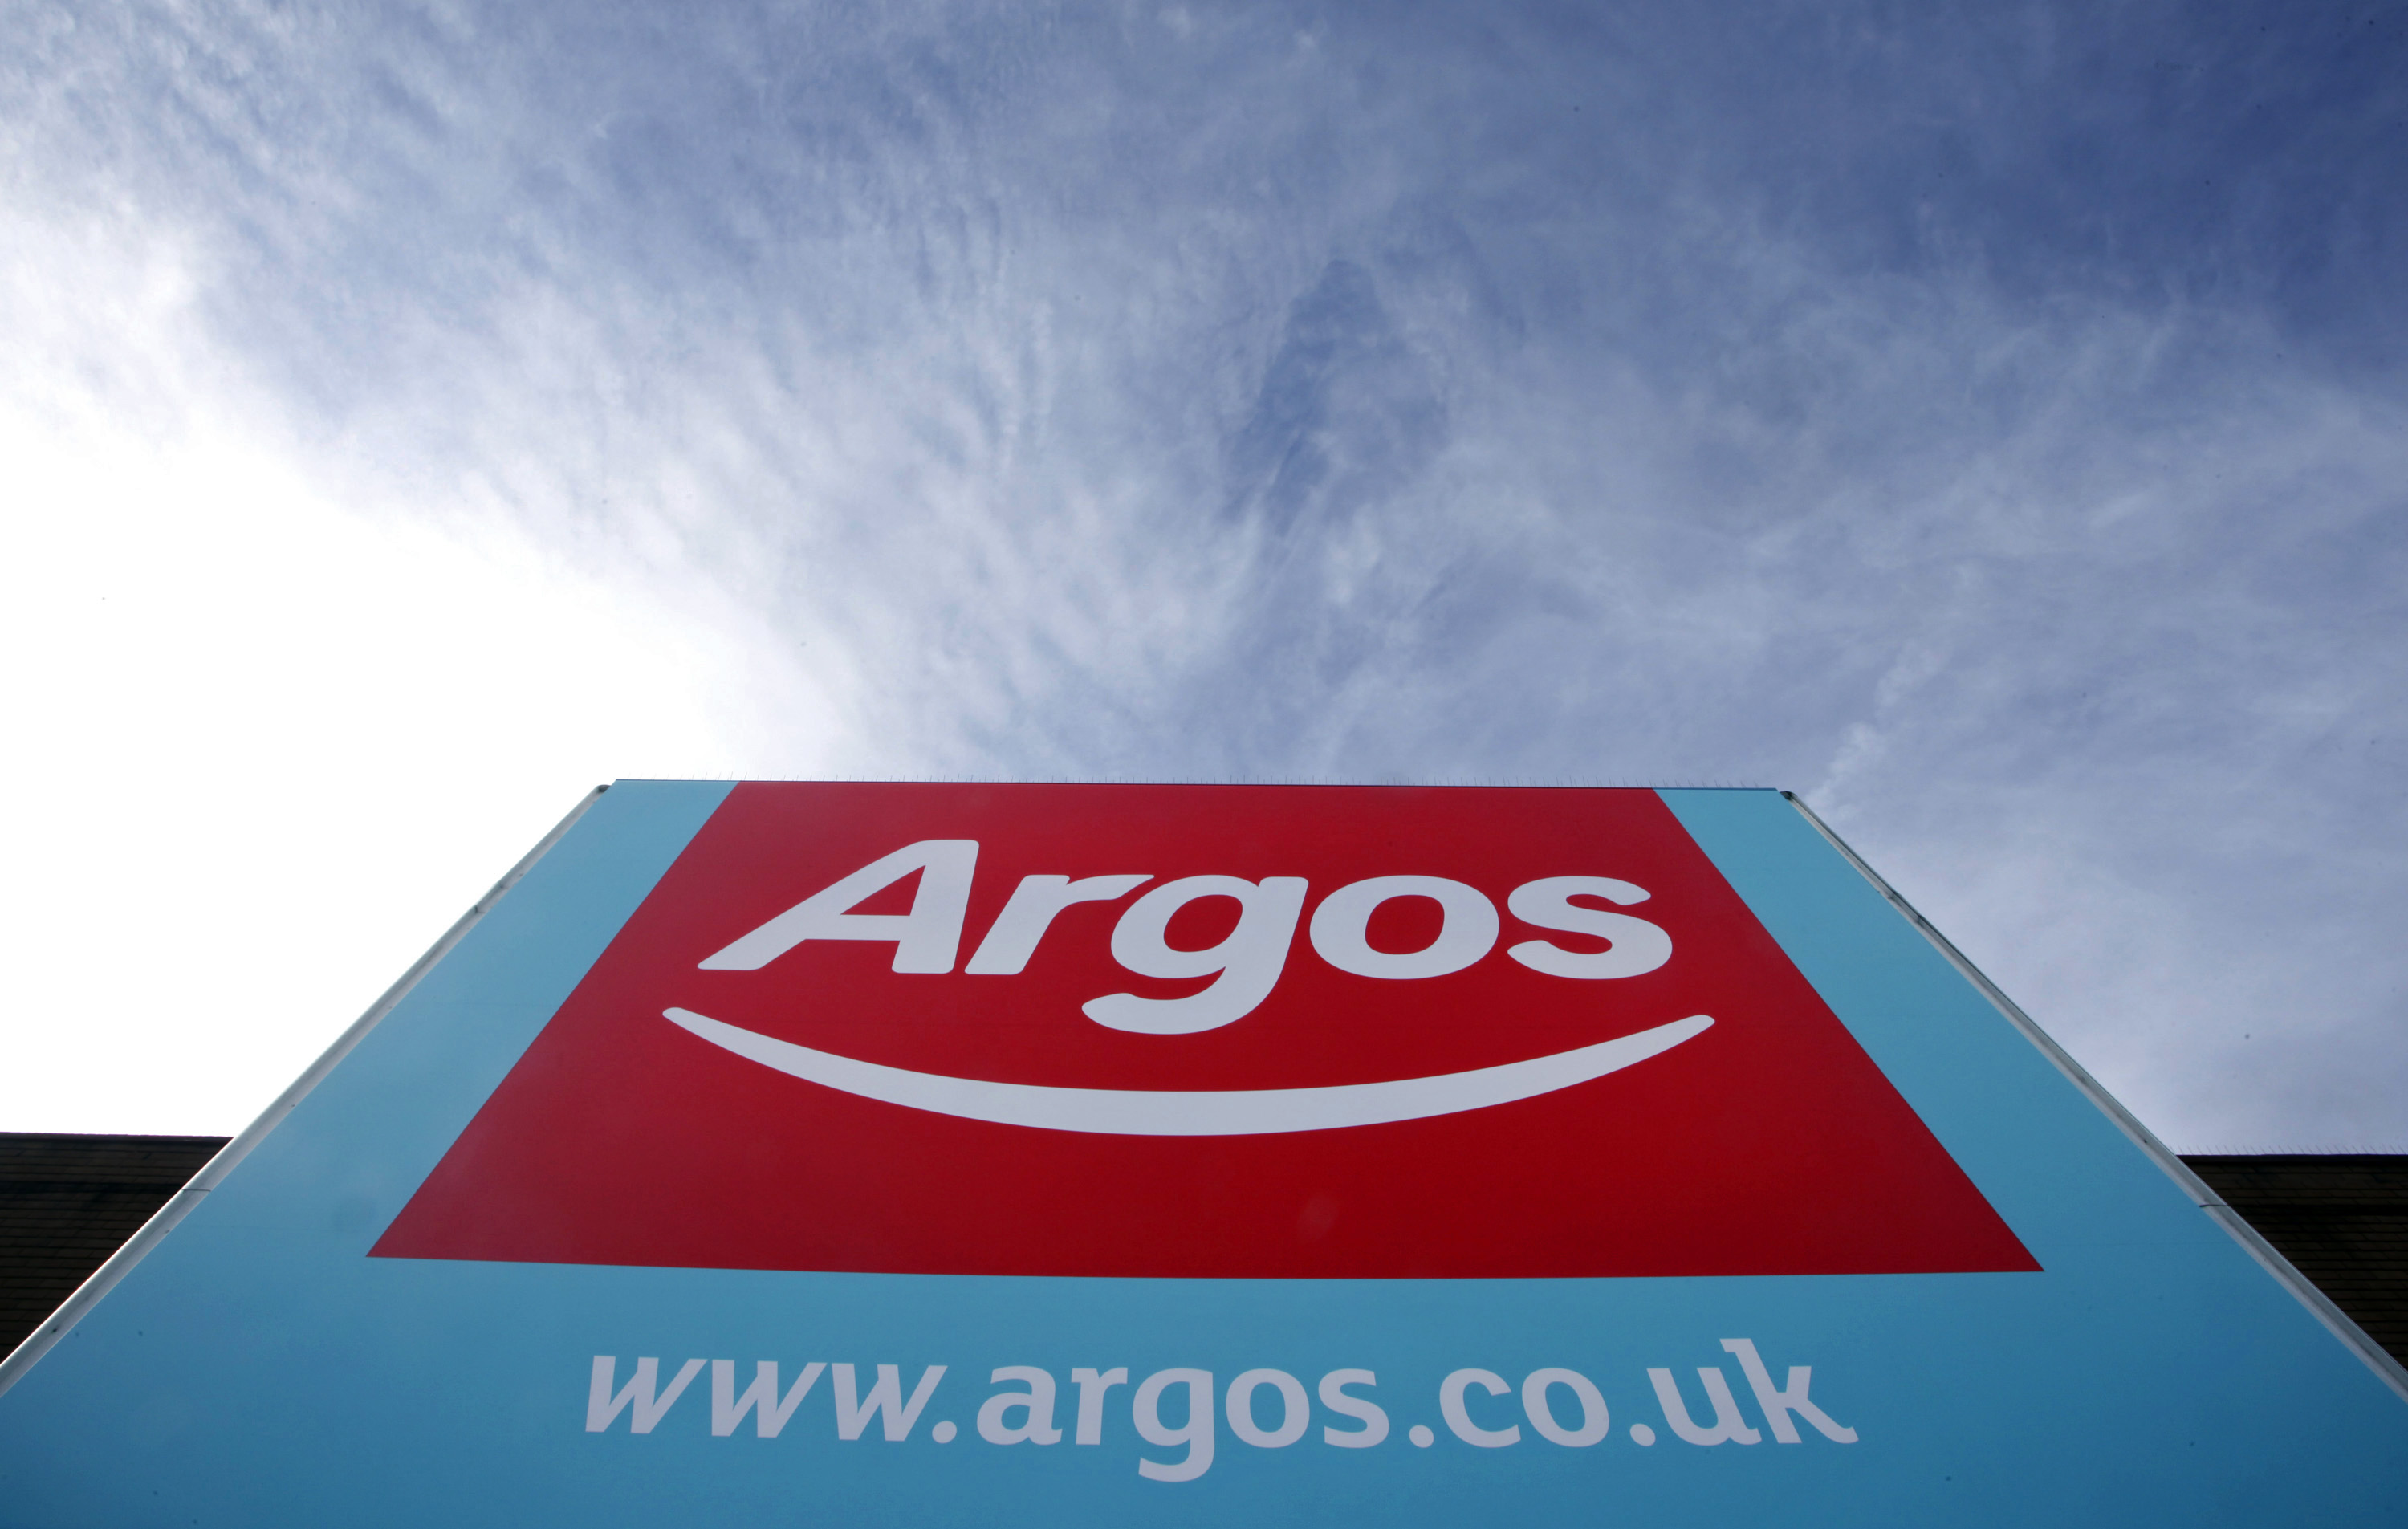 Argos to Close All Stores in Ireland With Loss of 580 Jobs - Bloomberg